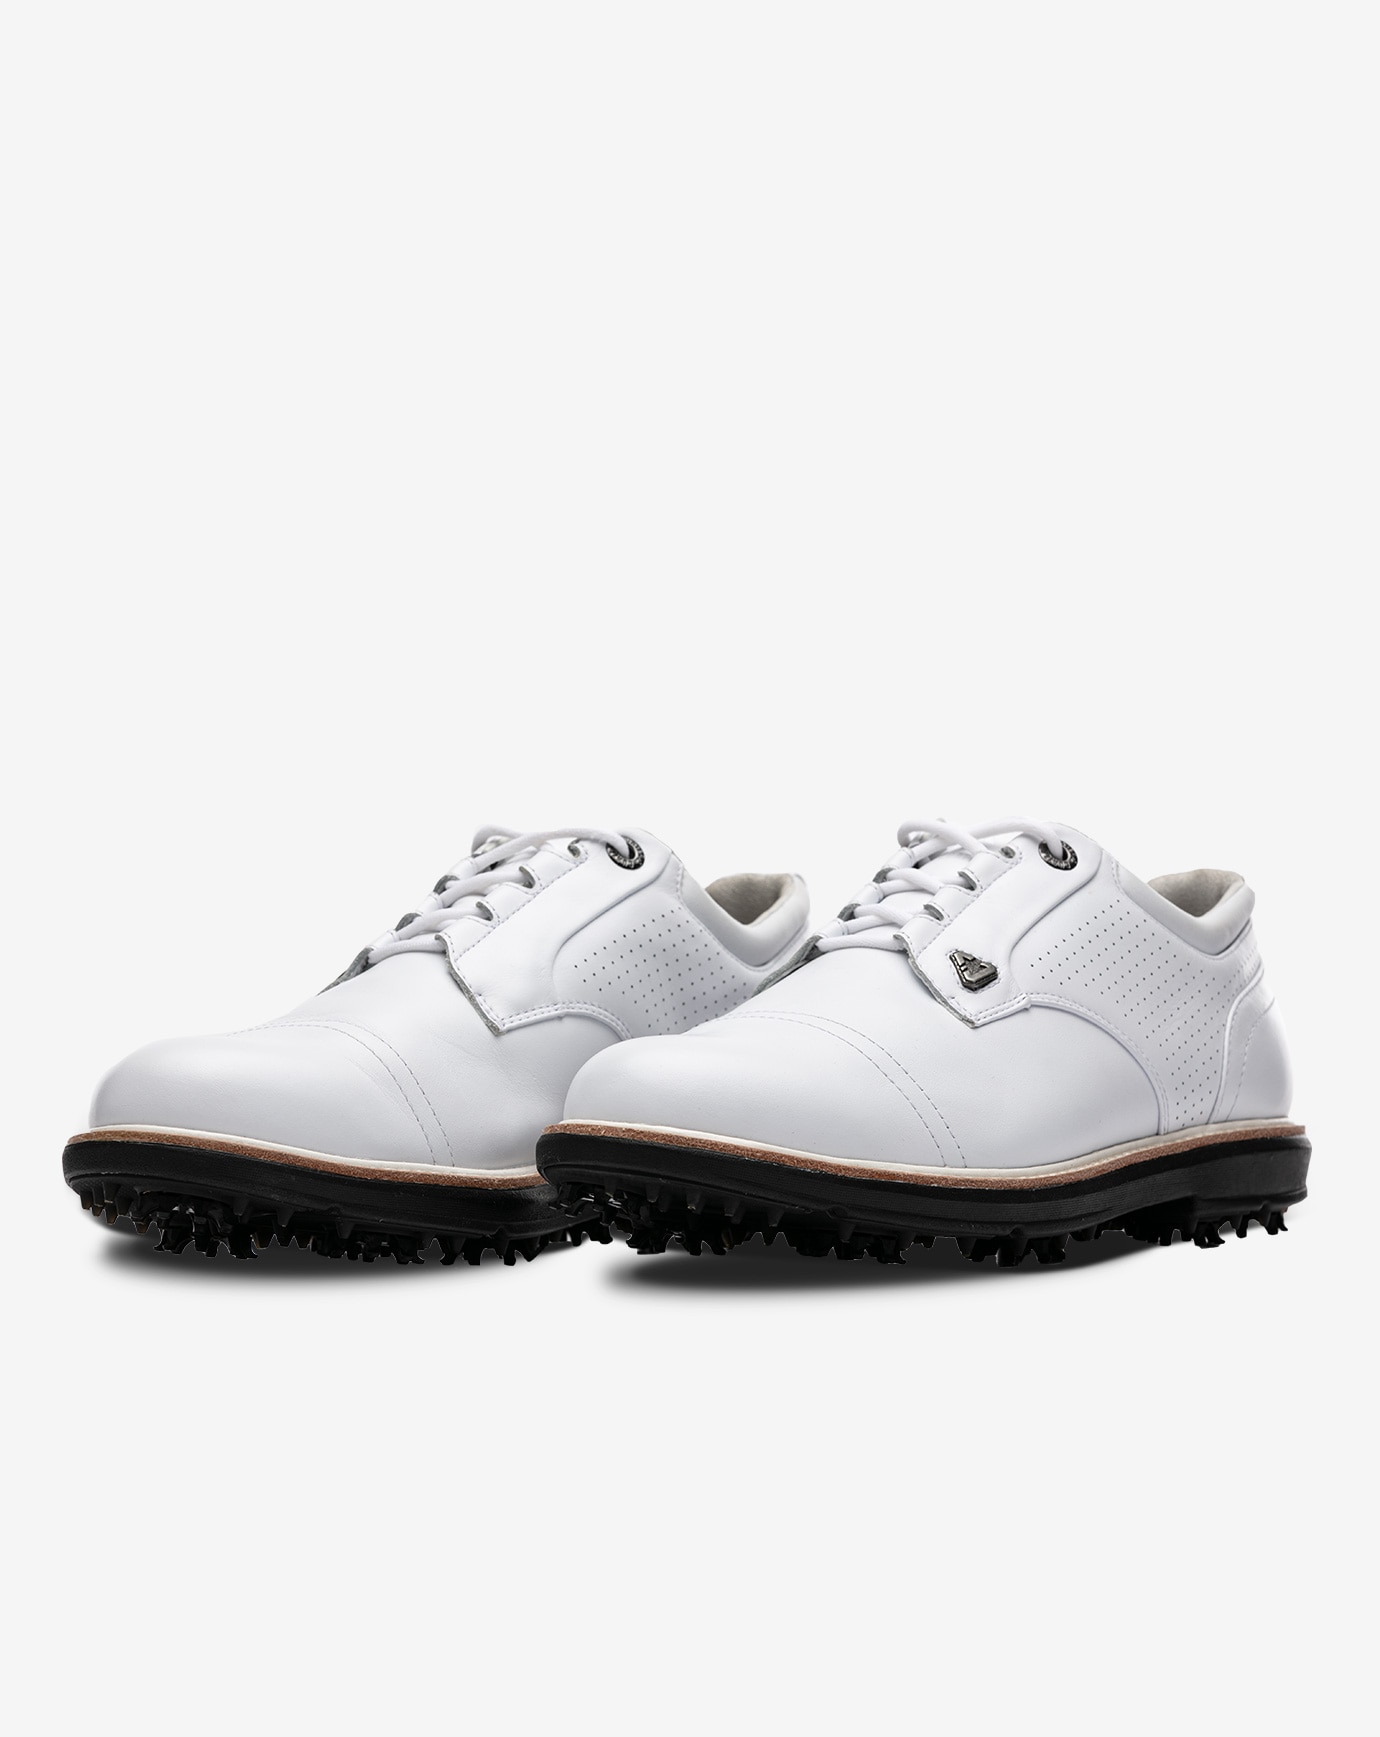 THE LEGEND SPIKED GOLF SHOE Image Thumbnail 5